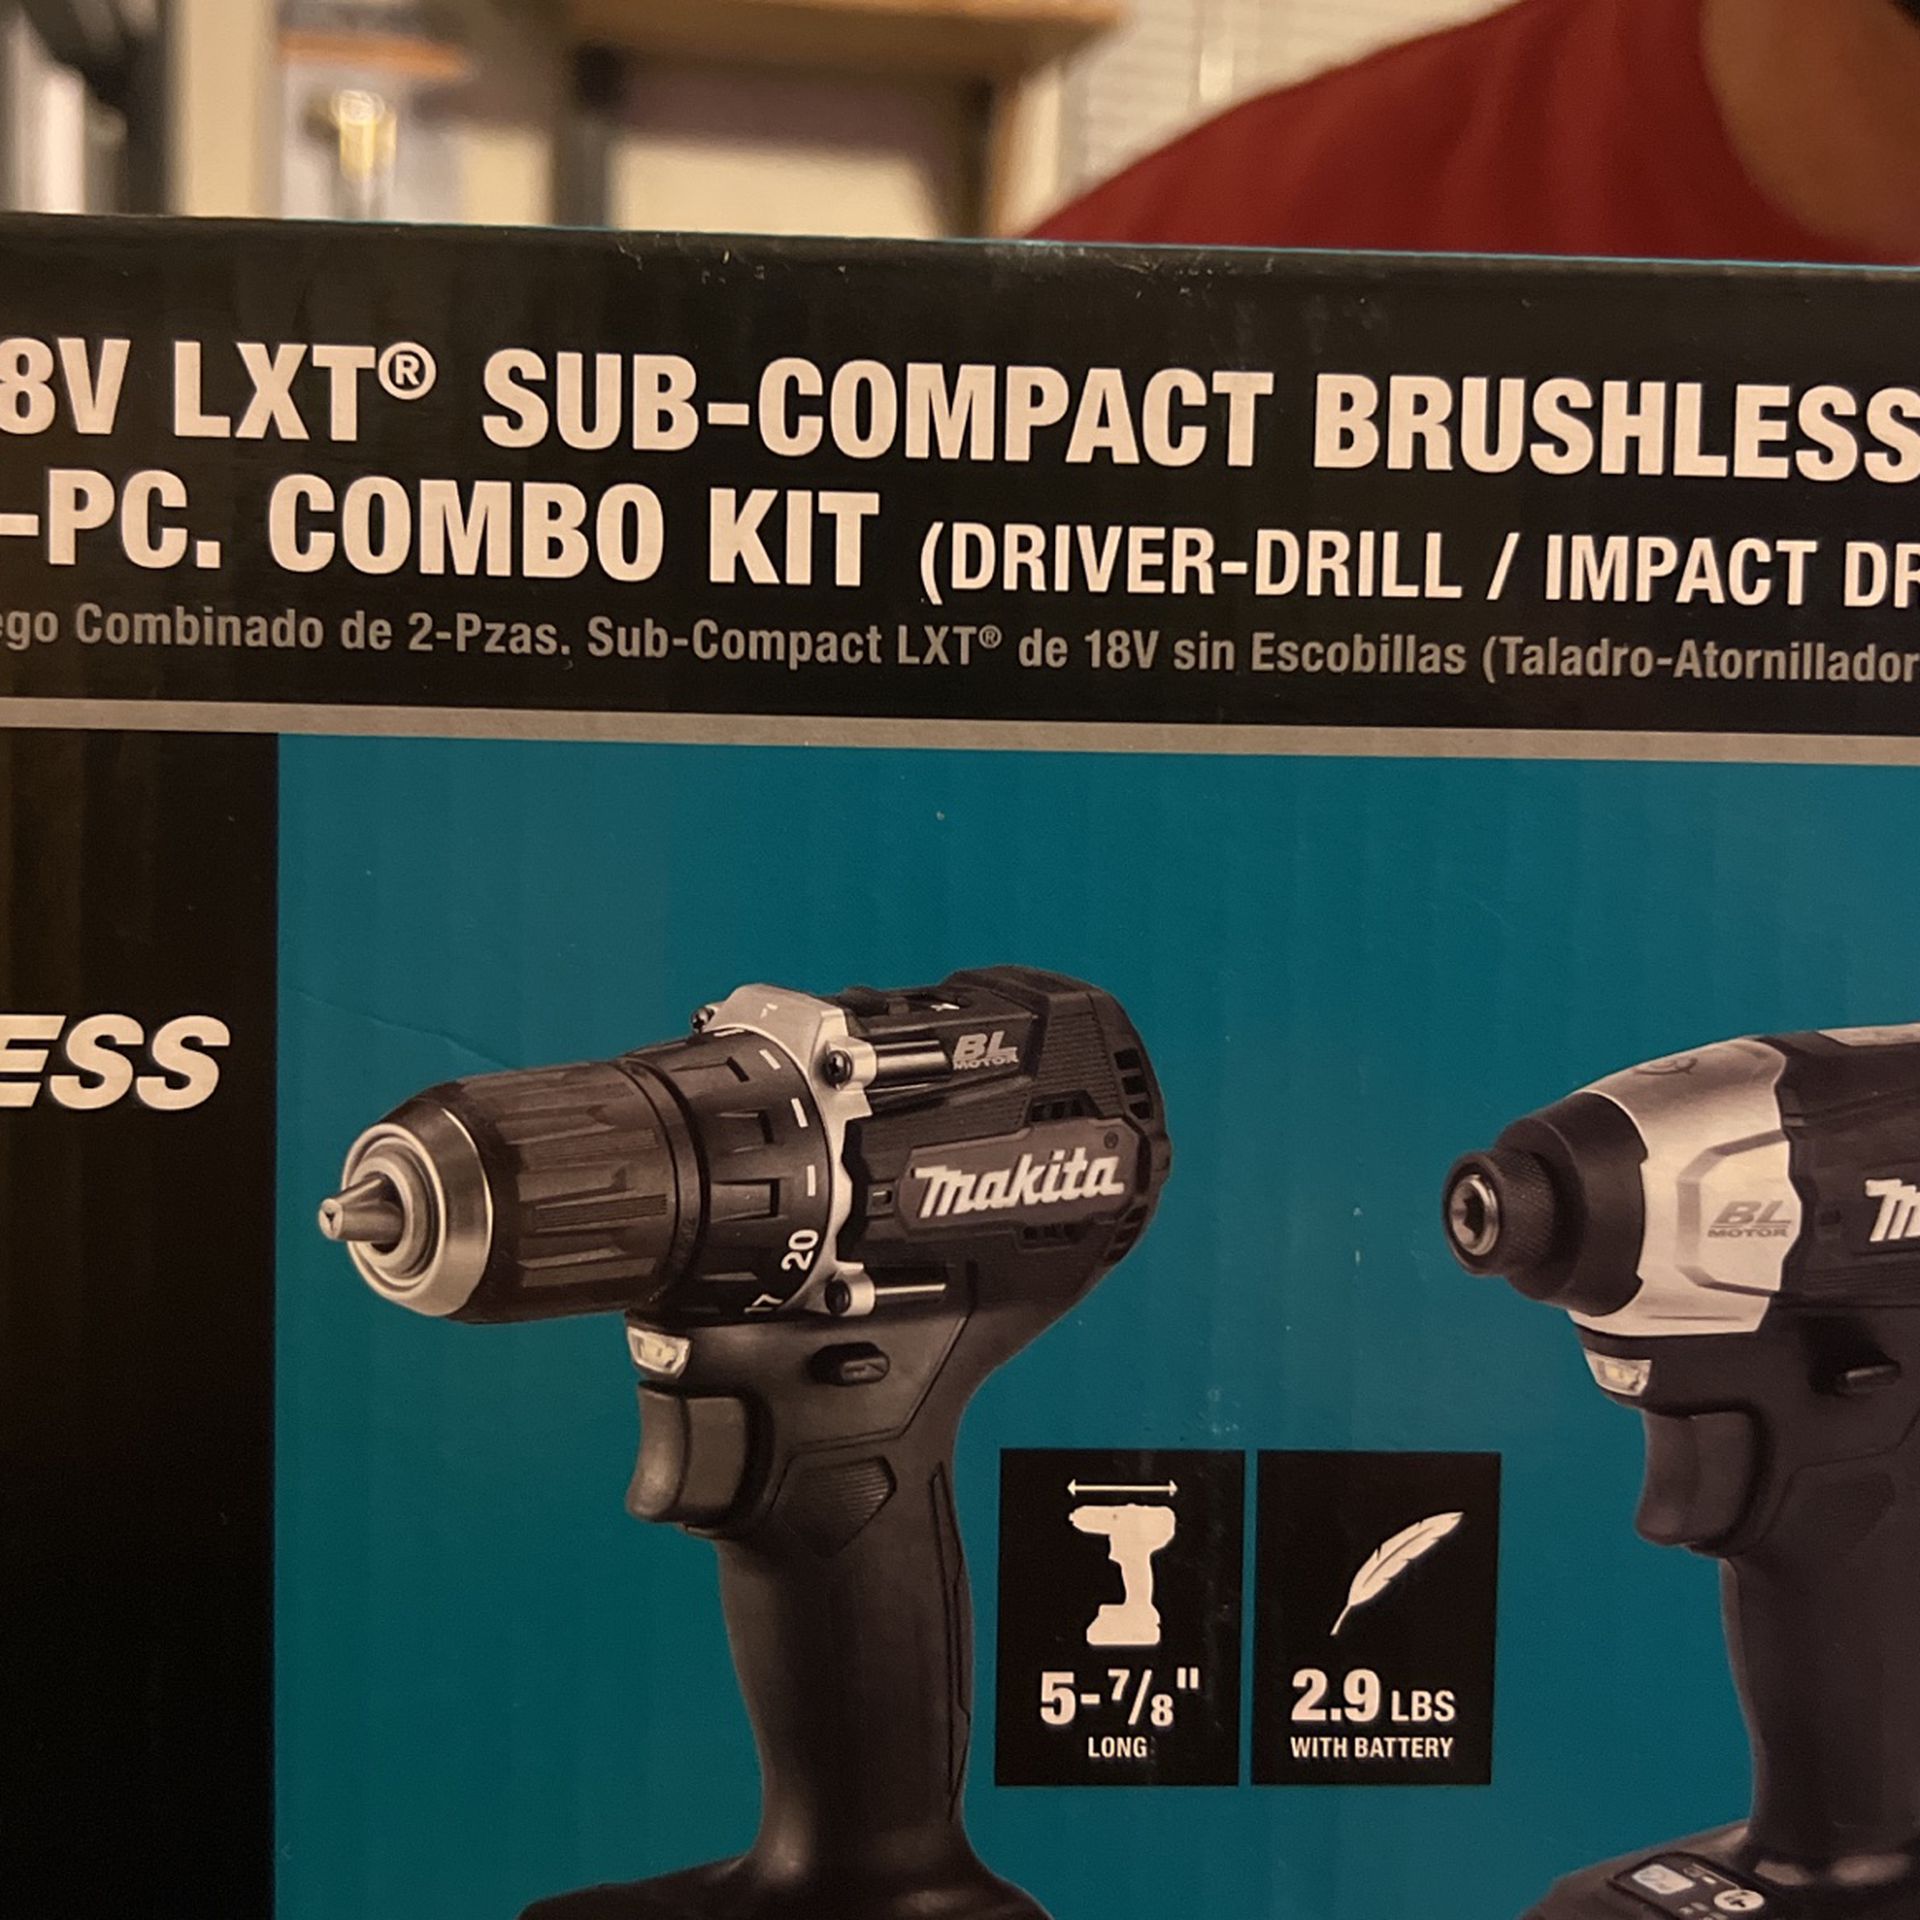 Makita 18V LXT Sub-Compact Lithium-Ion Brushless Cordless 2-piece Combo Kit  1.5Ah for Sale in Glendale, AZ OfferUp